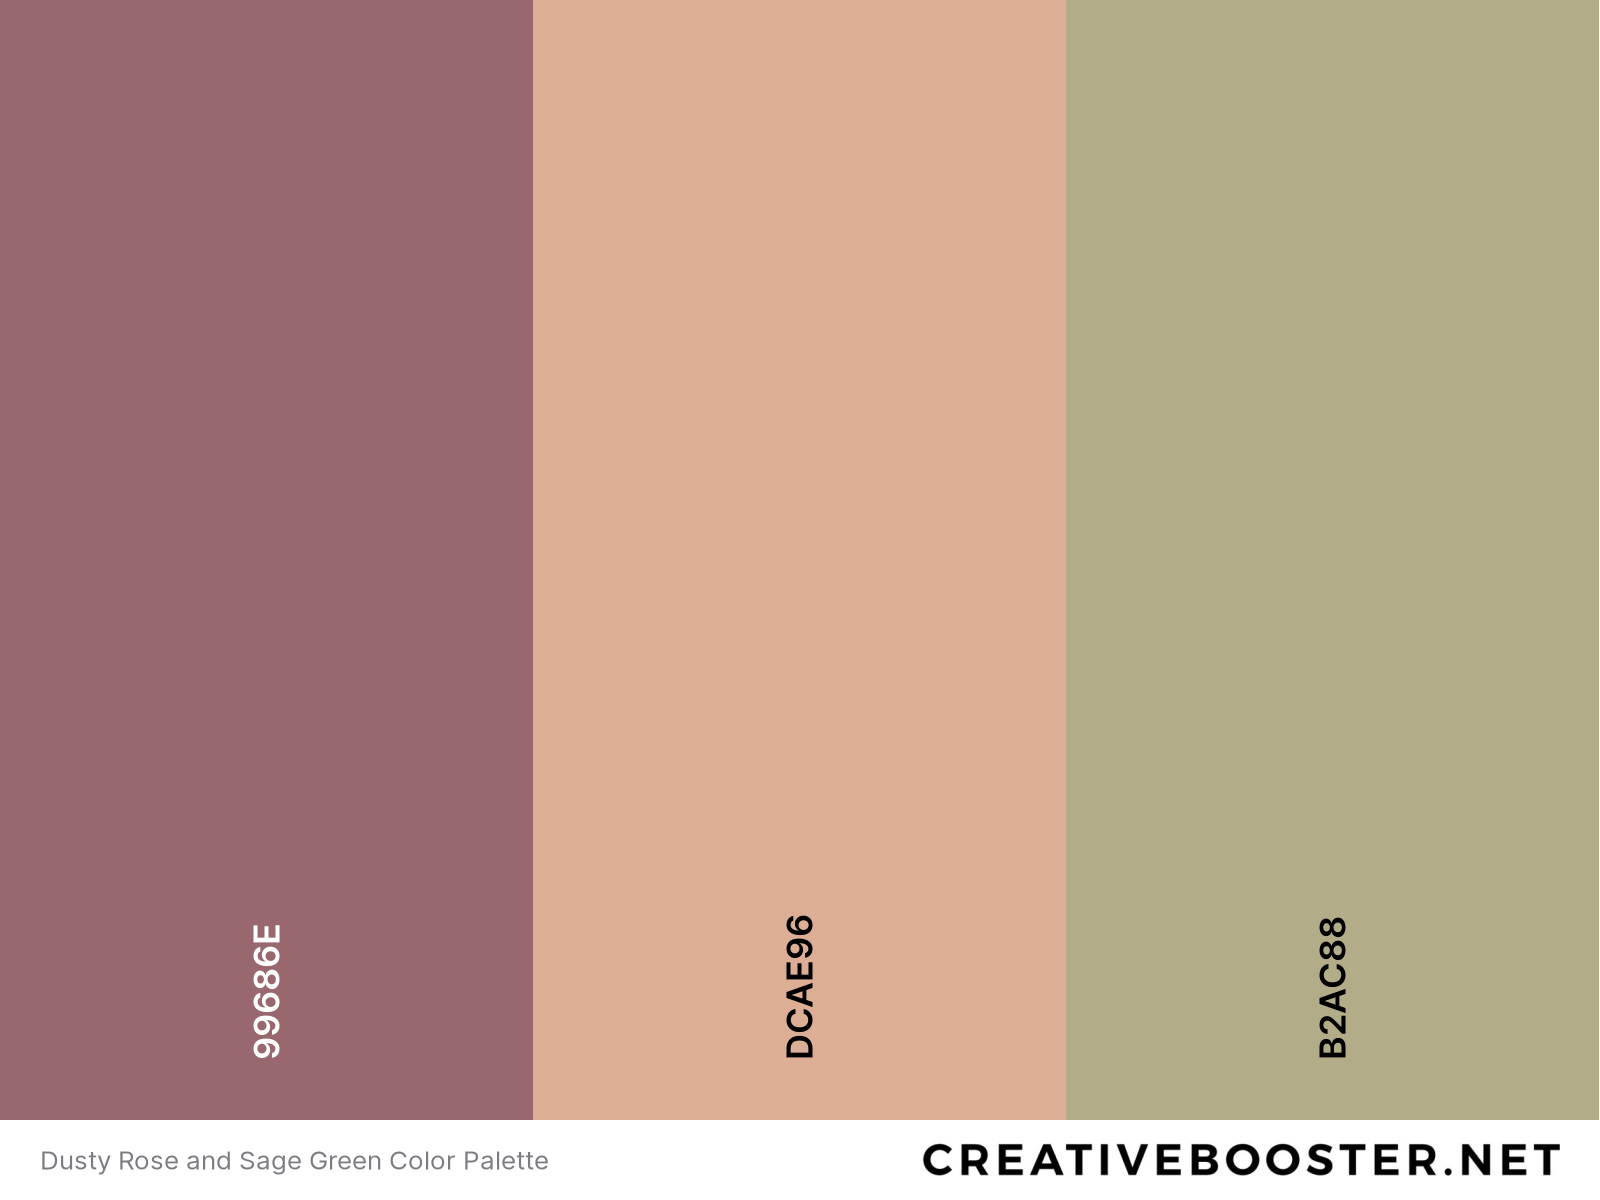 Dusty Rose and Sage Green Color Palette